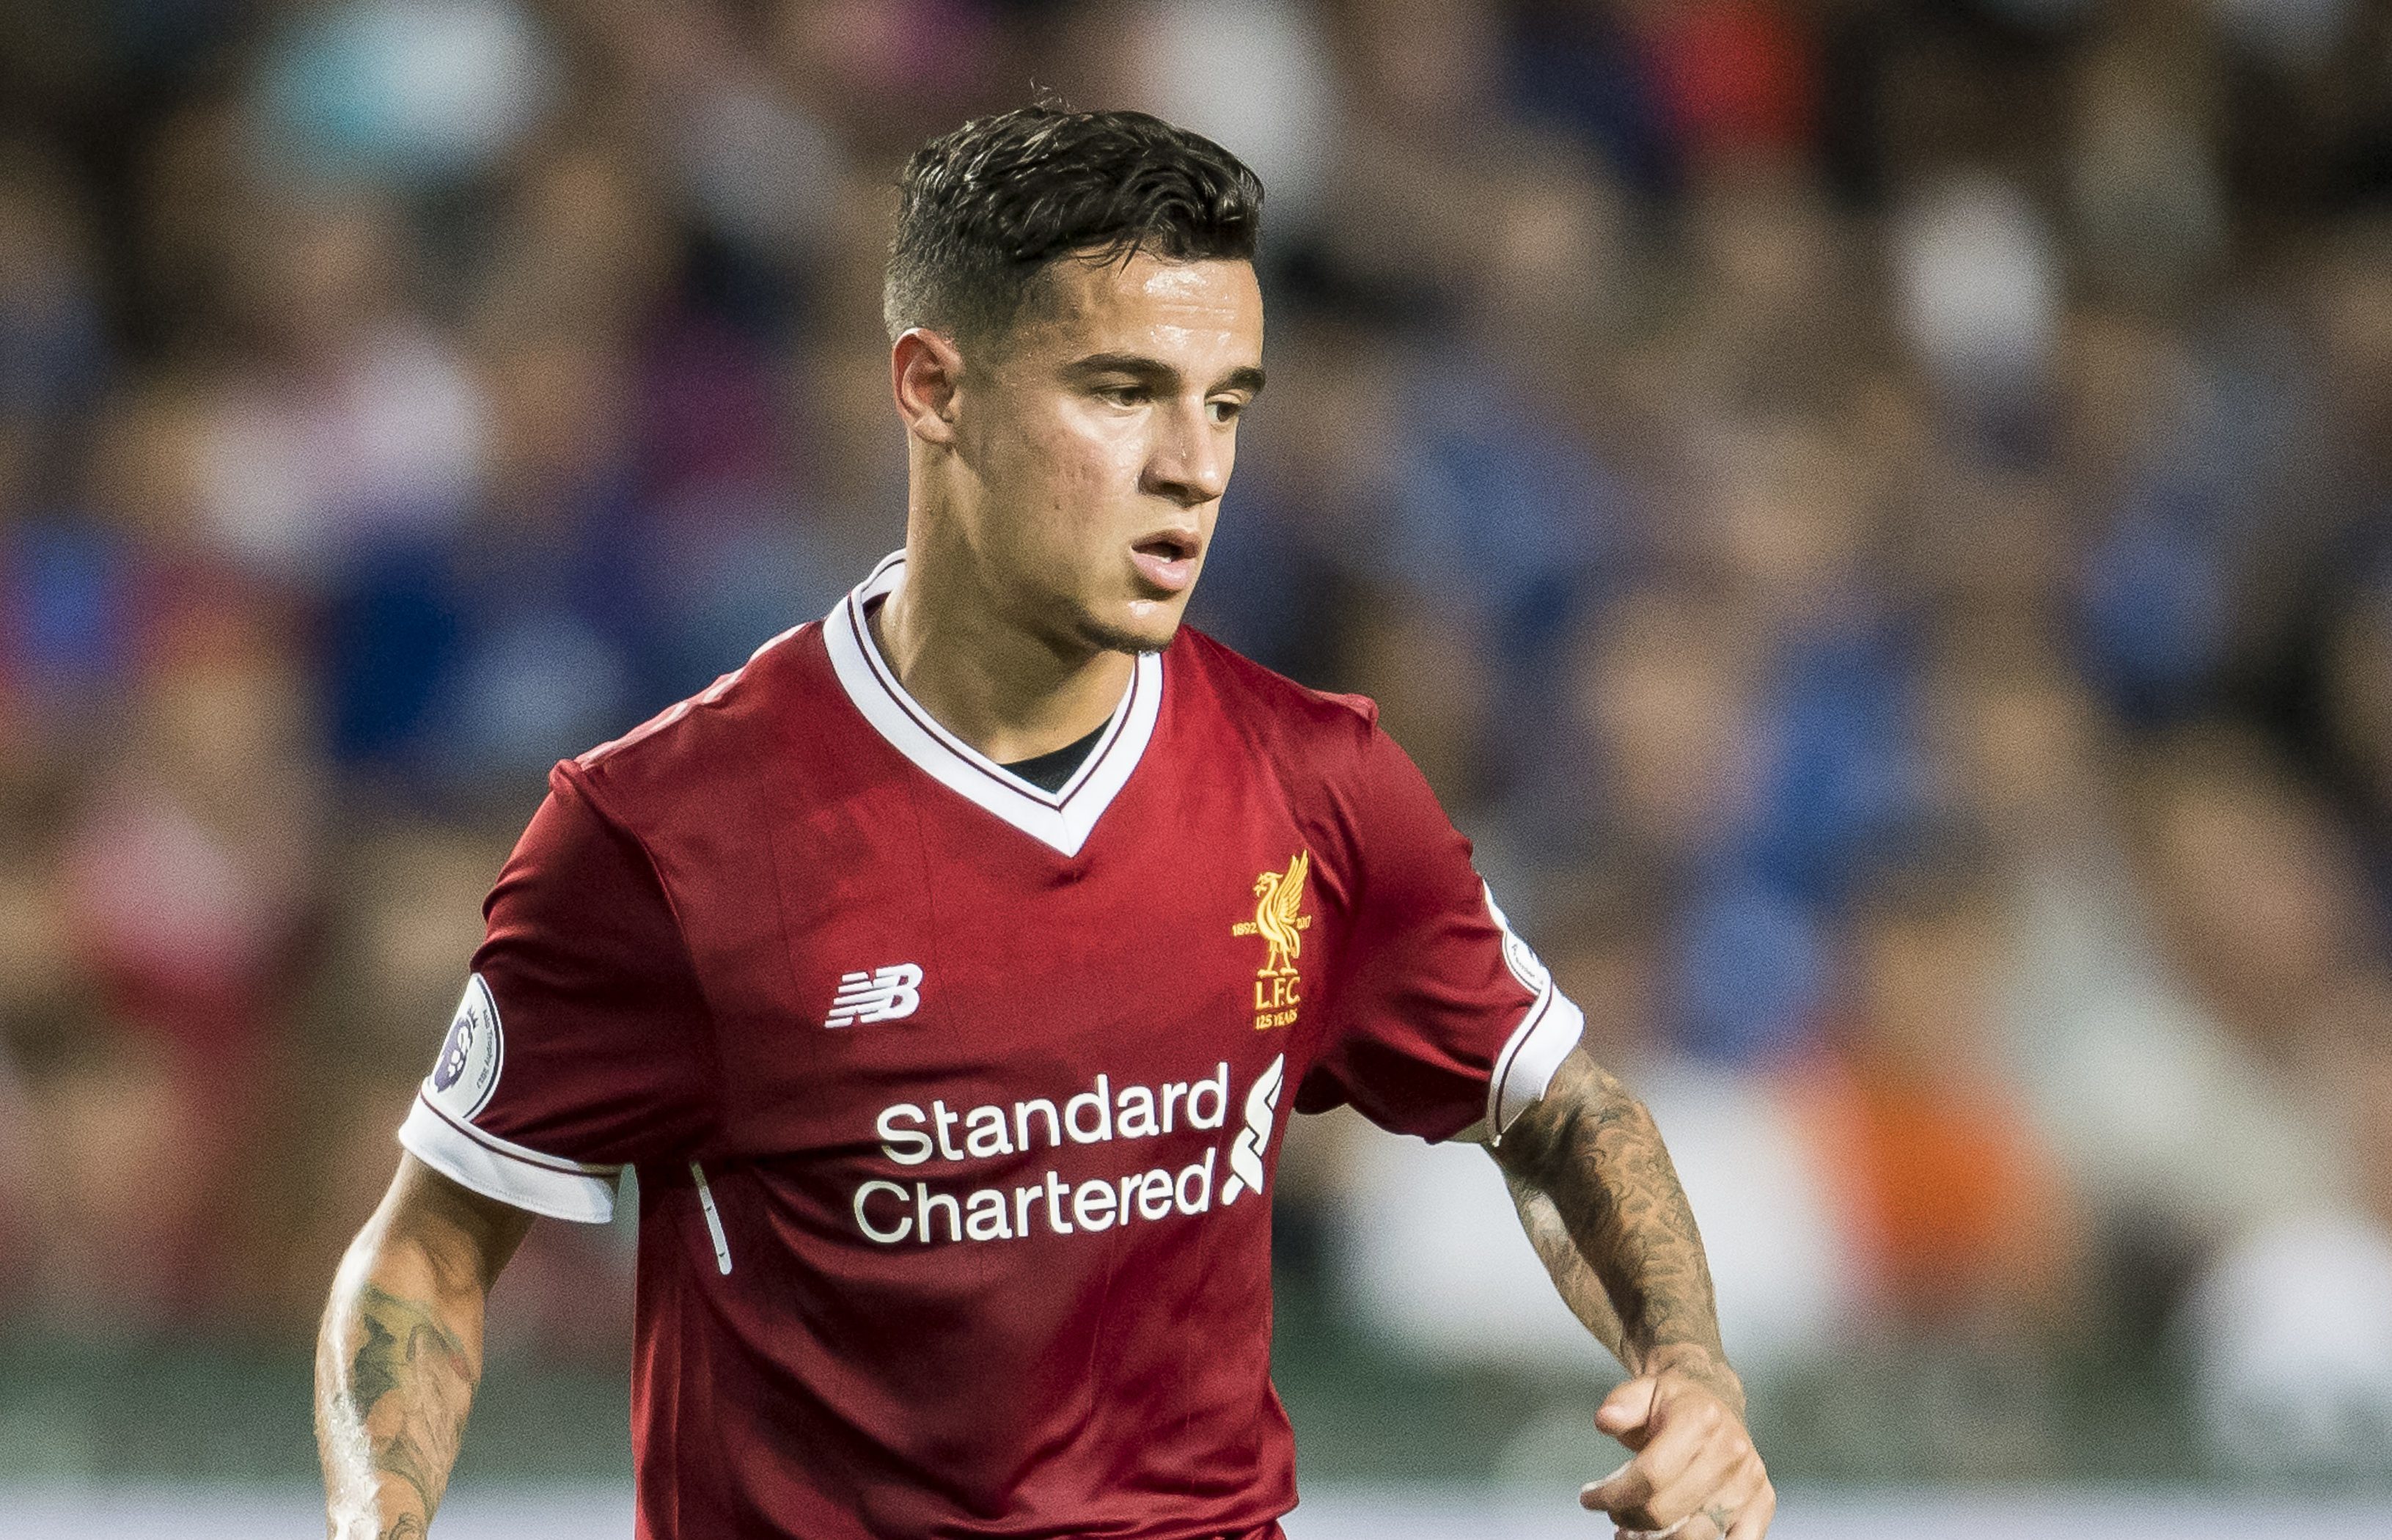 Liverpool FC midfielder Philippe Coutinho in action (Victor Fraile/Getty Images )